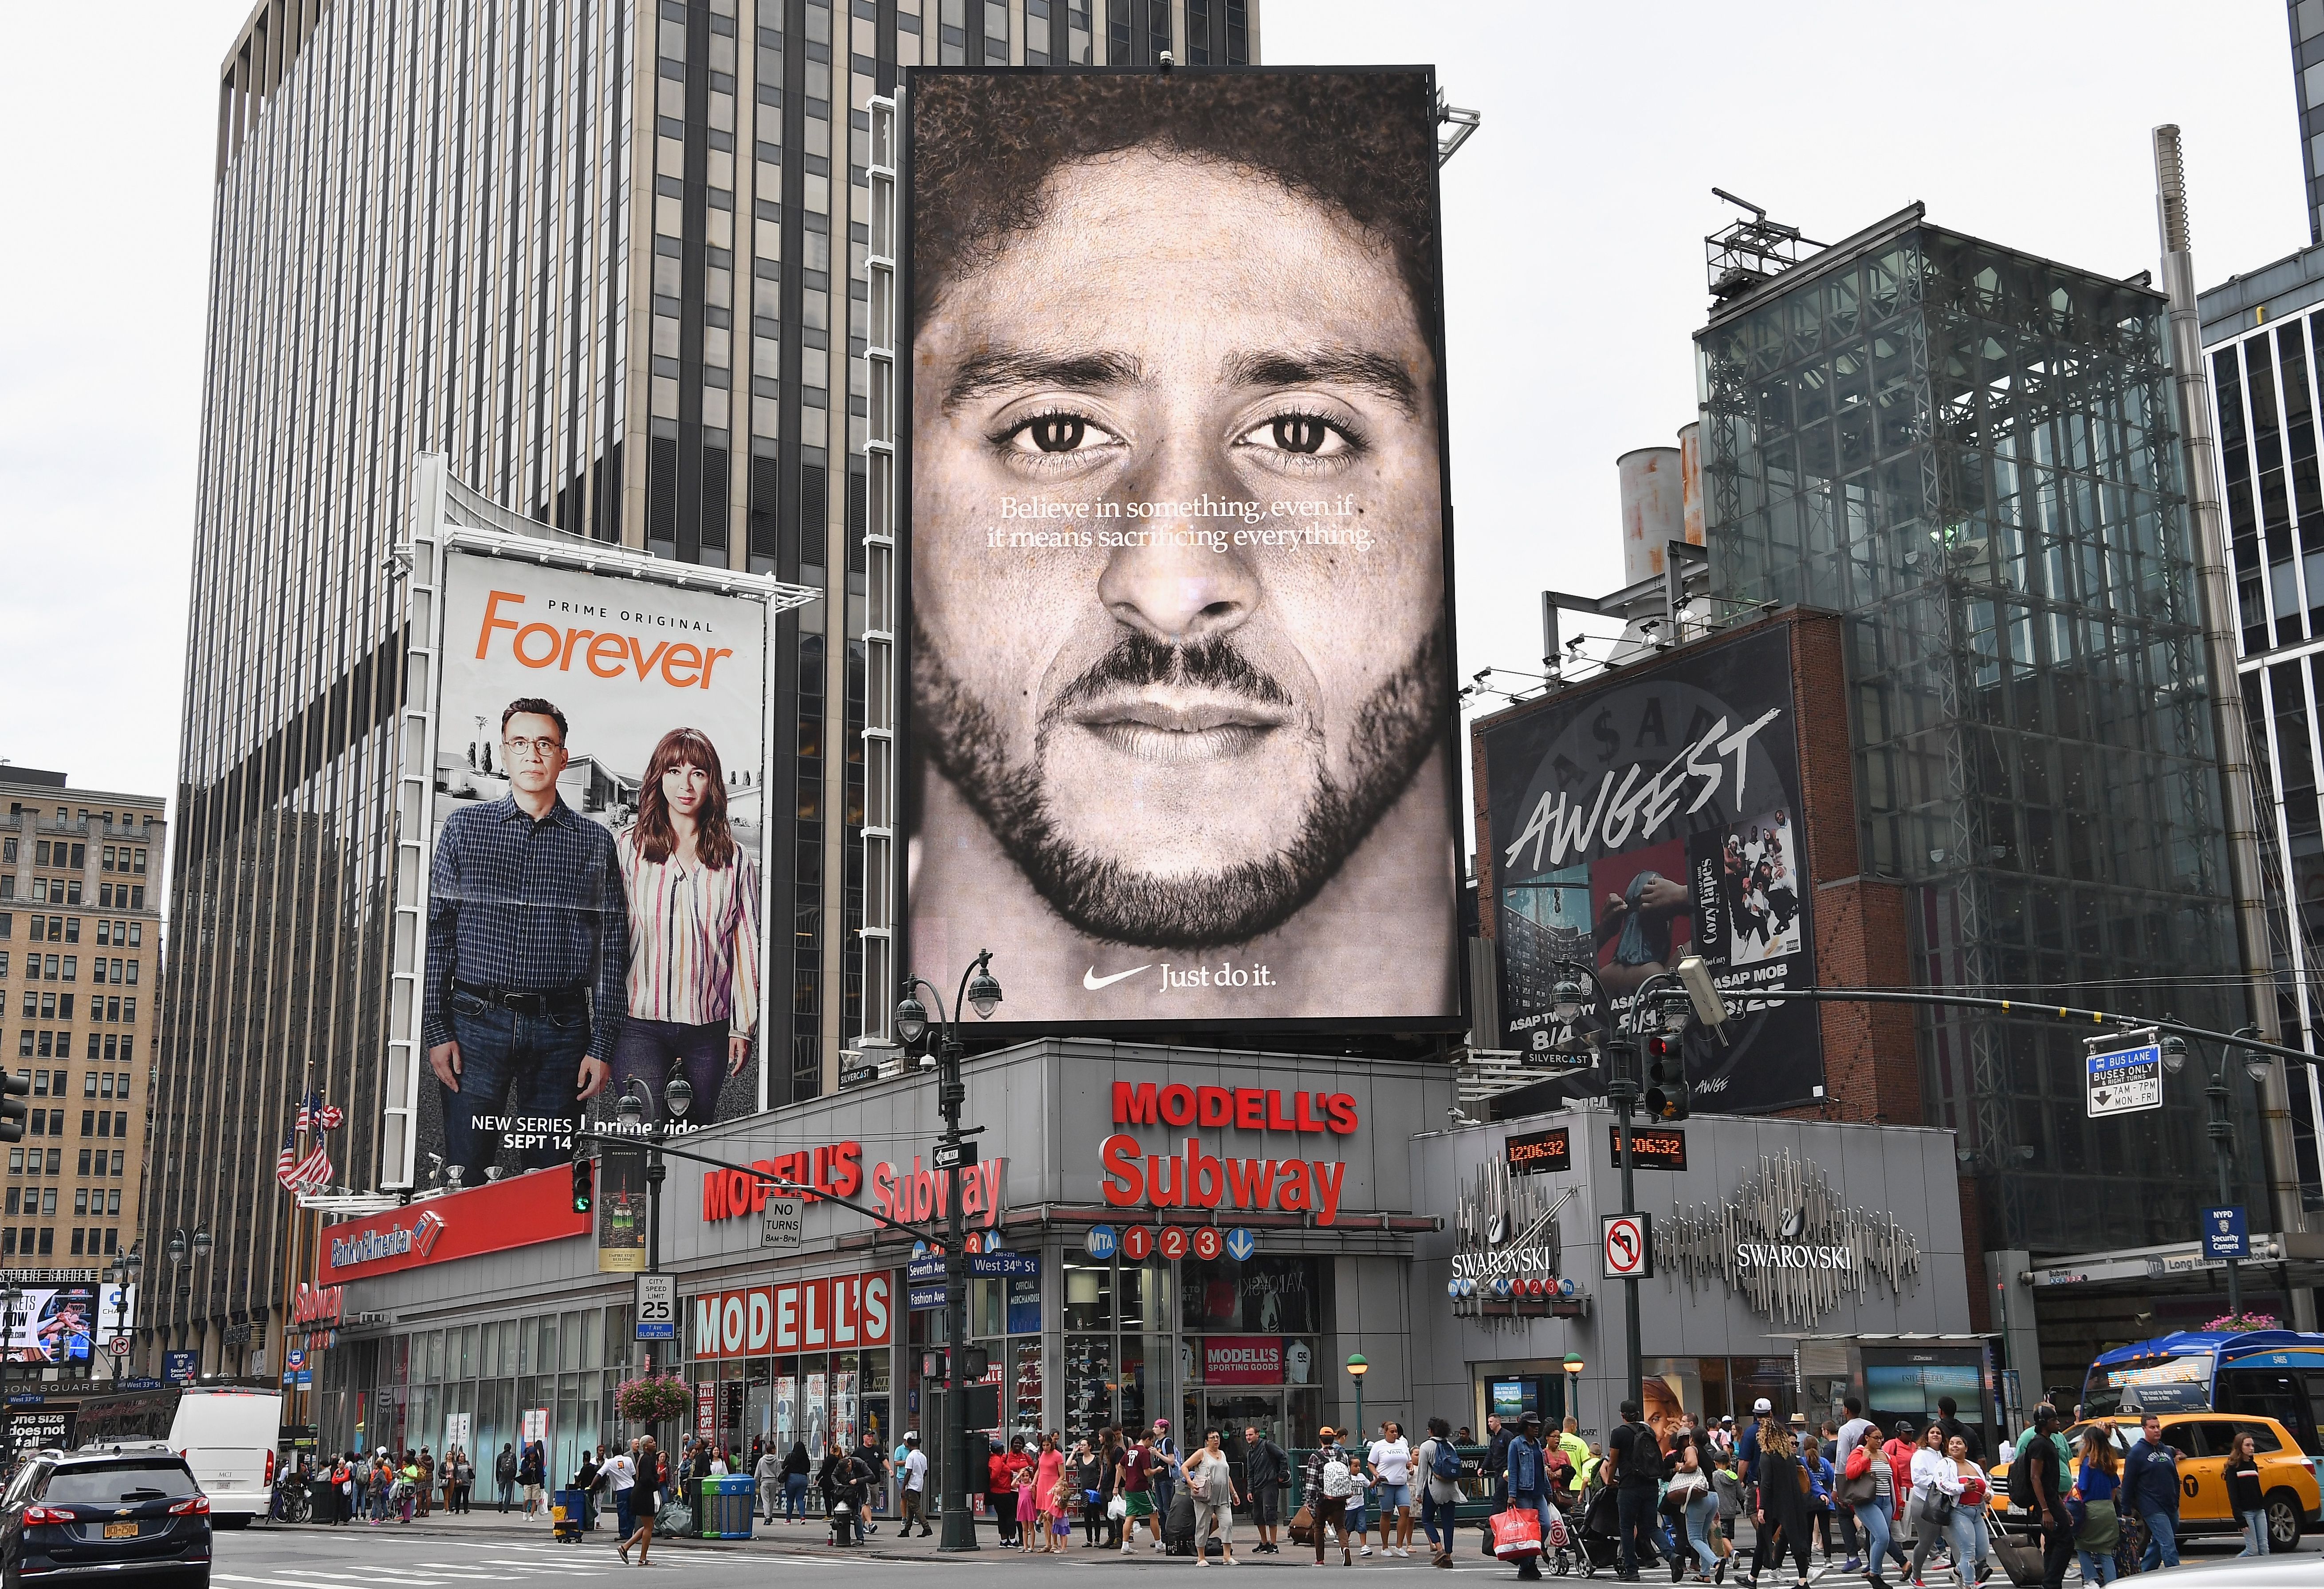 A Nike Ad featuring American football quarterback Colin Kaepernick is on diplay September 8, 2018 in New York City. (ANGELA WEISS/AFP/Getty Images)